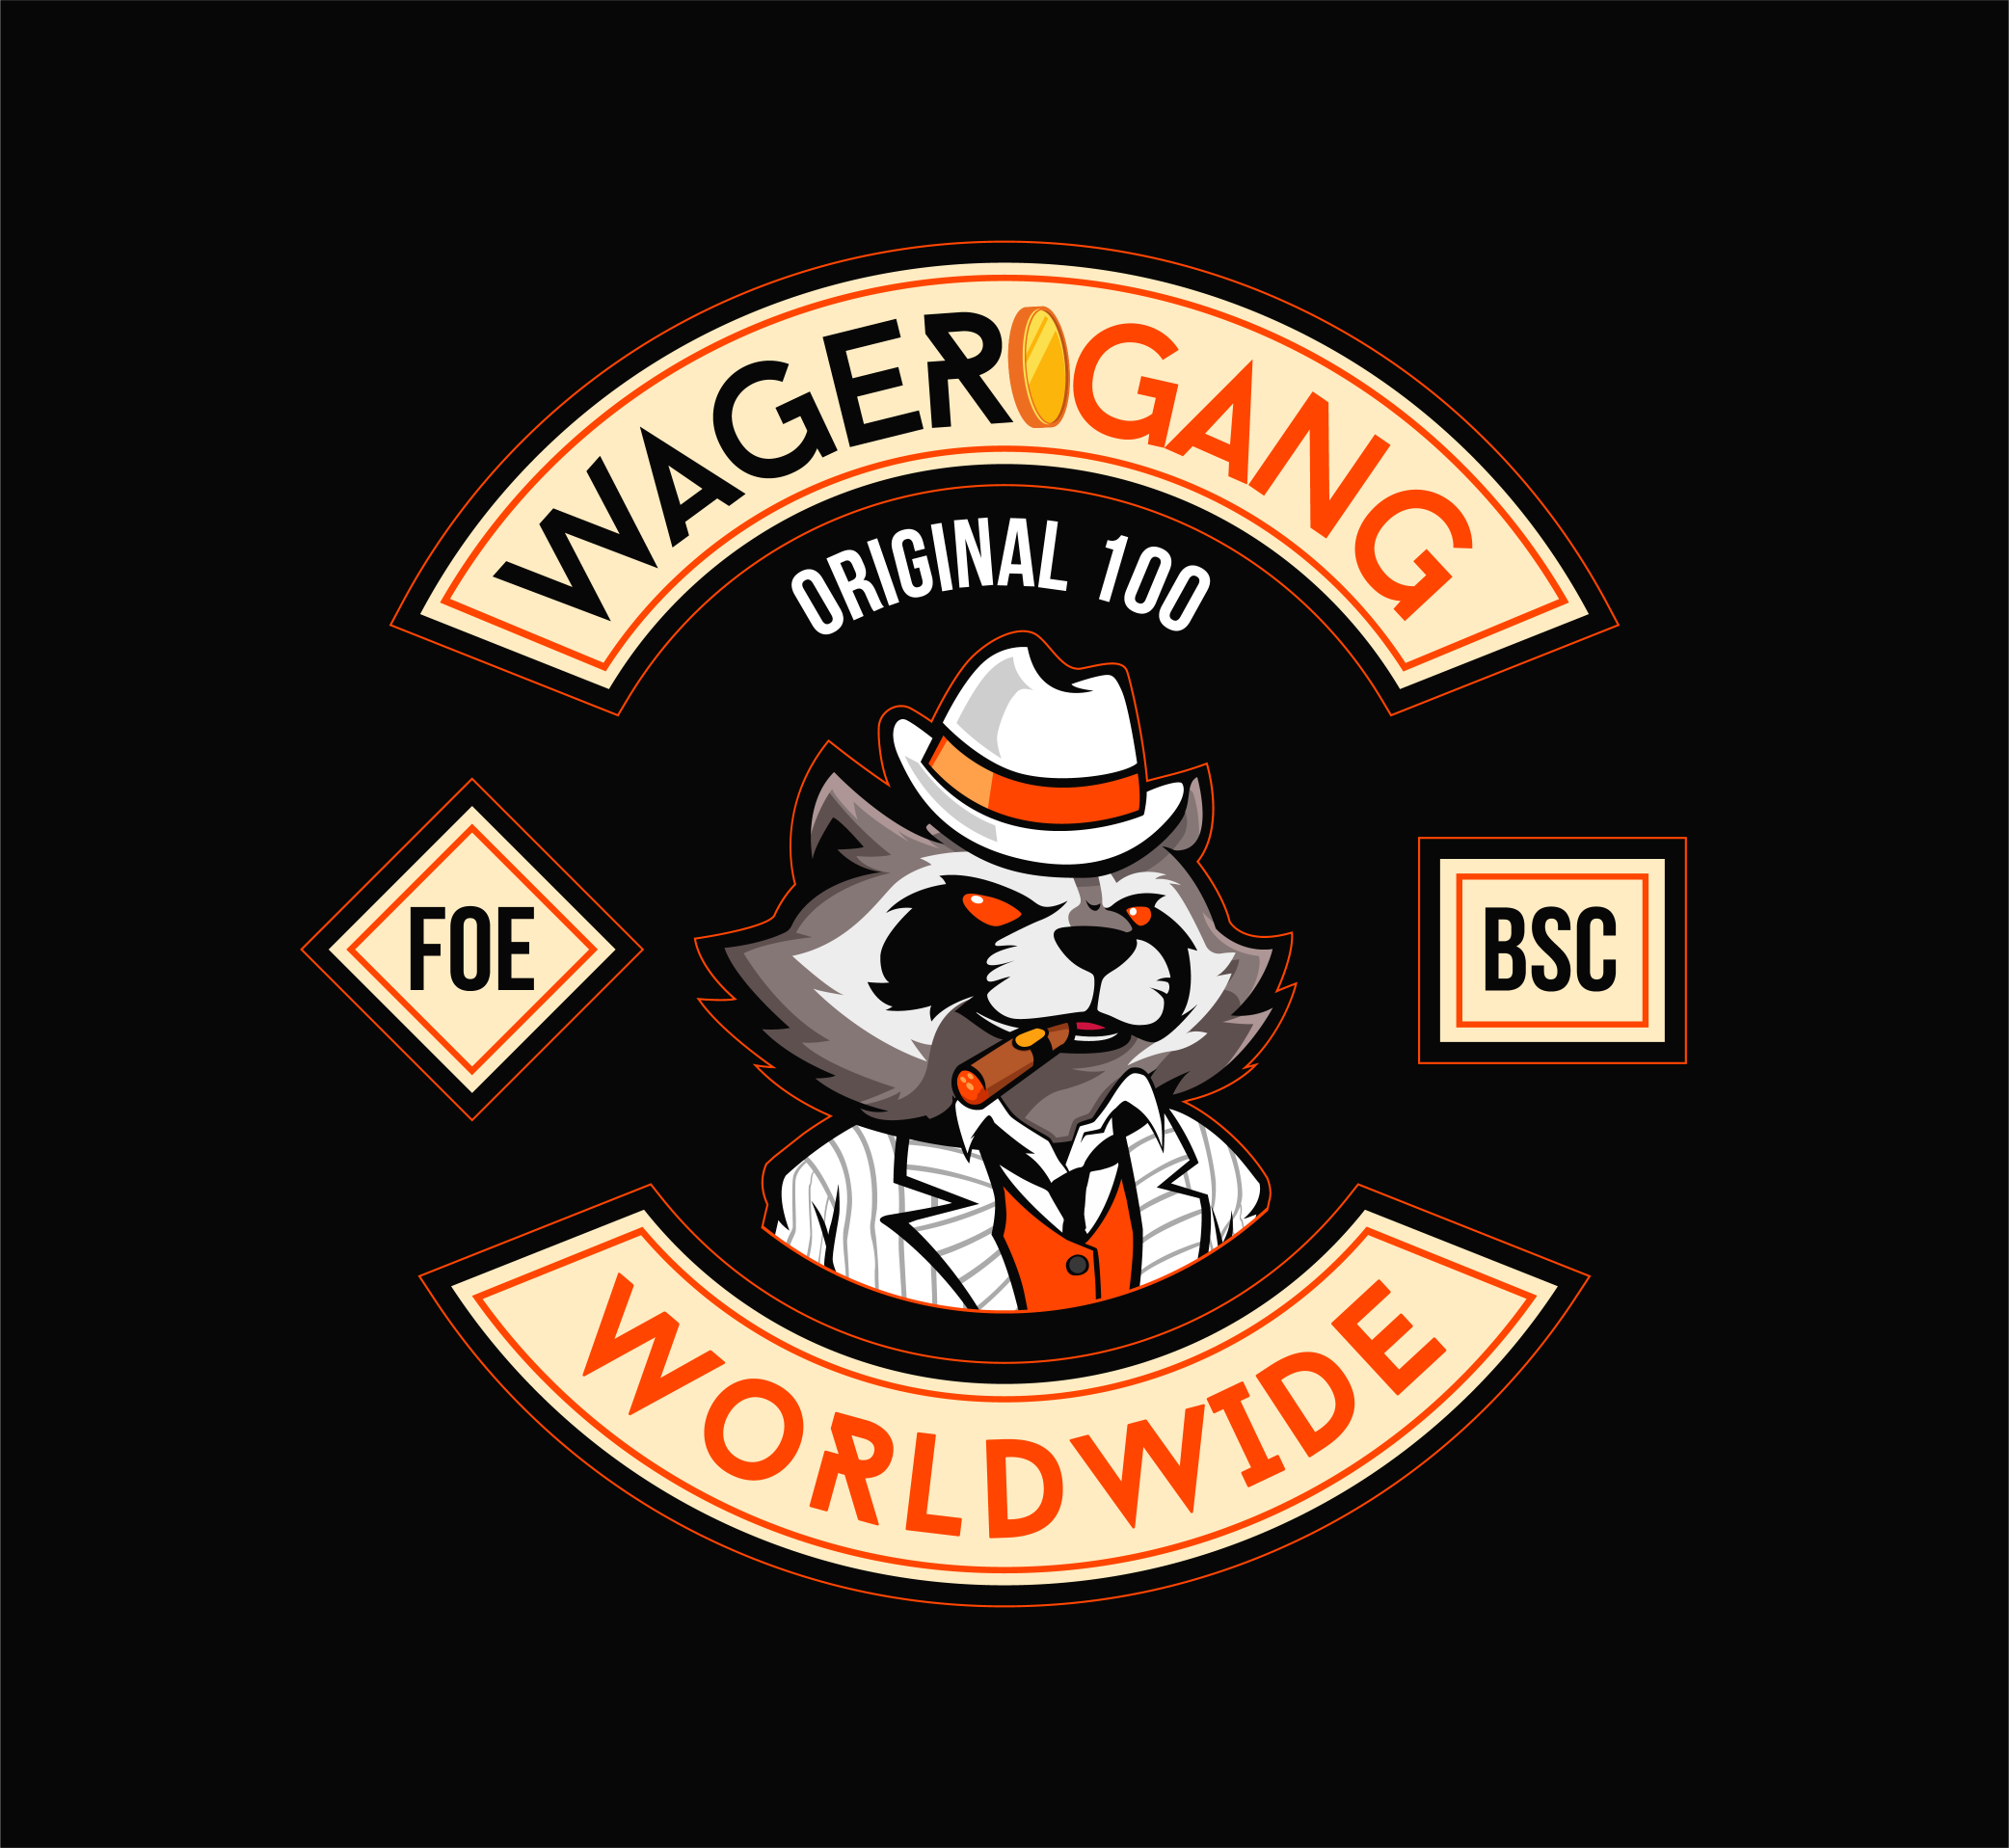 WagerGang Founder NFT